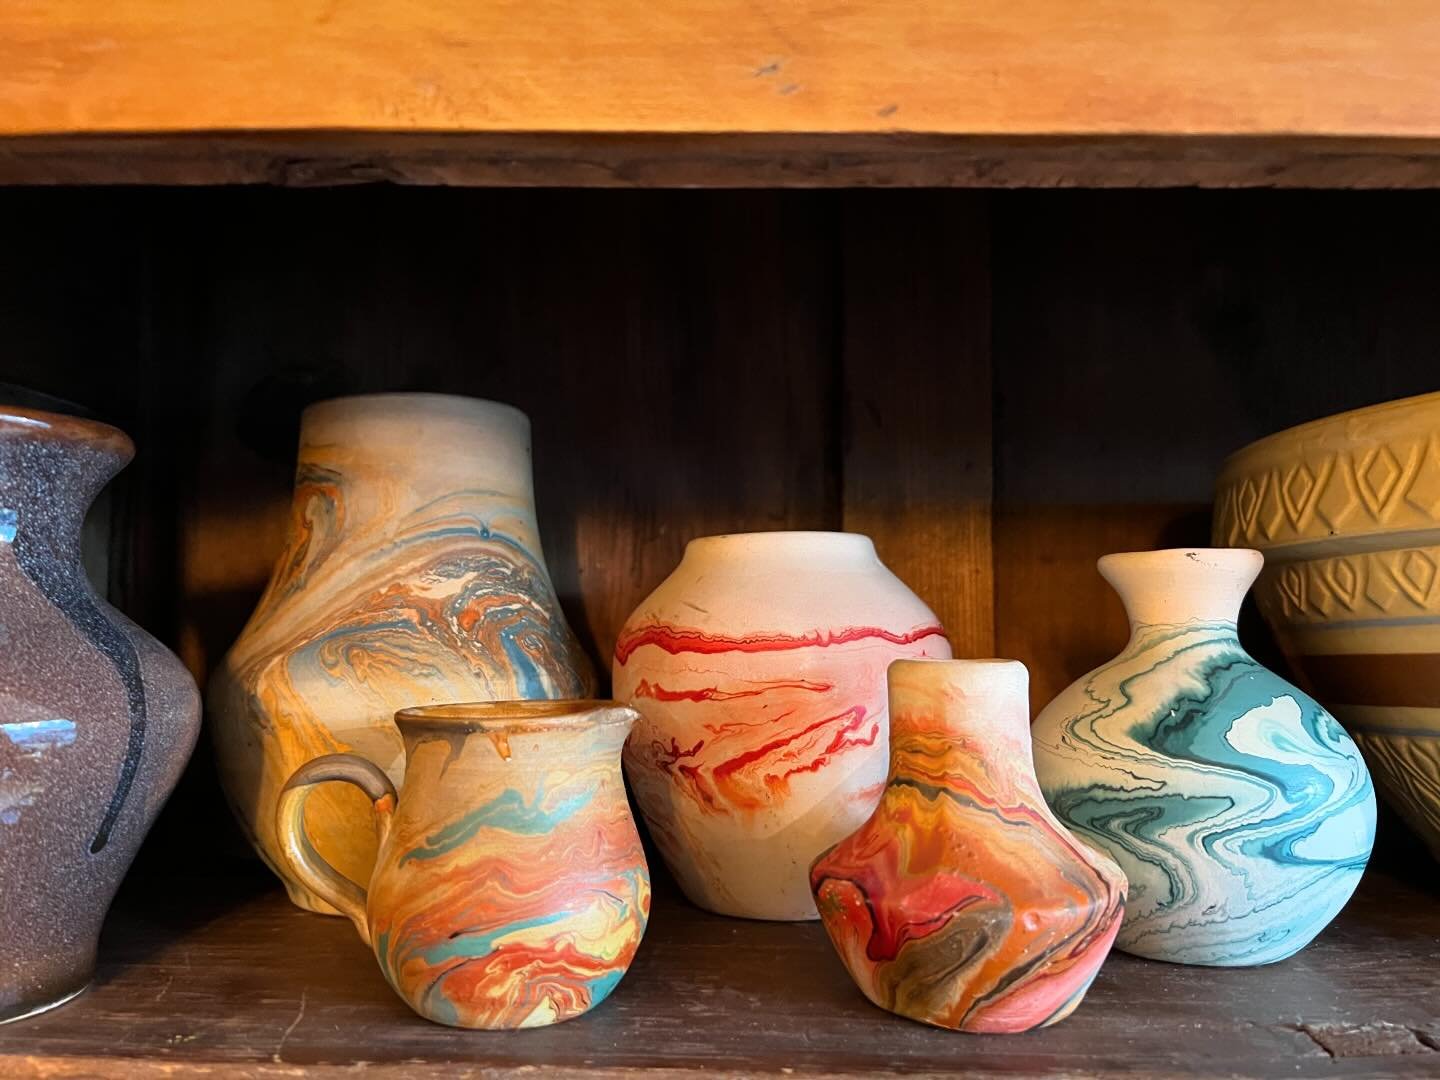 Nemadji pottery.  So beautiful! Nemadji pottery comes from the Arrowhead region of Minnesota. It has never actually been made by native Americans, but is said to be reminiscent of the style and colouring used by them. It has come to be thought of by 